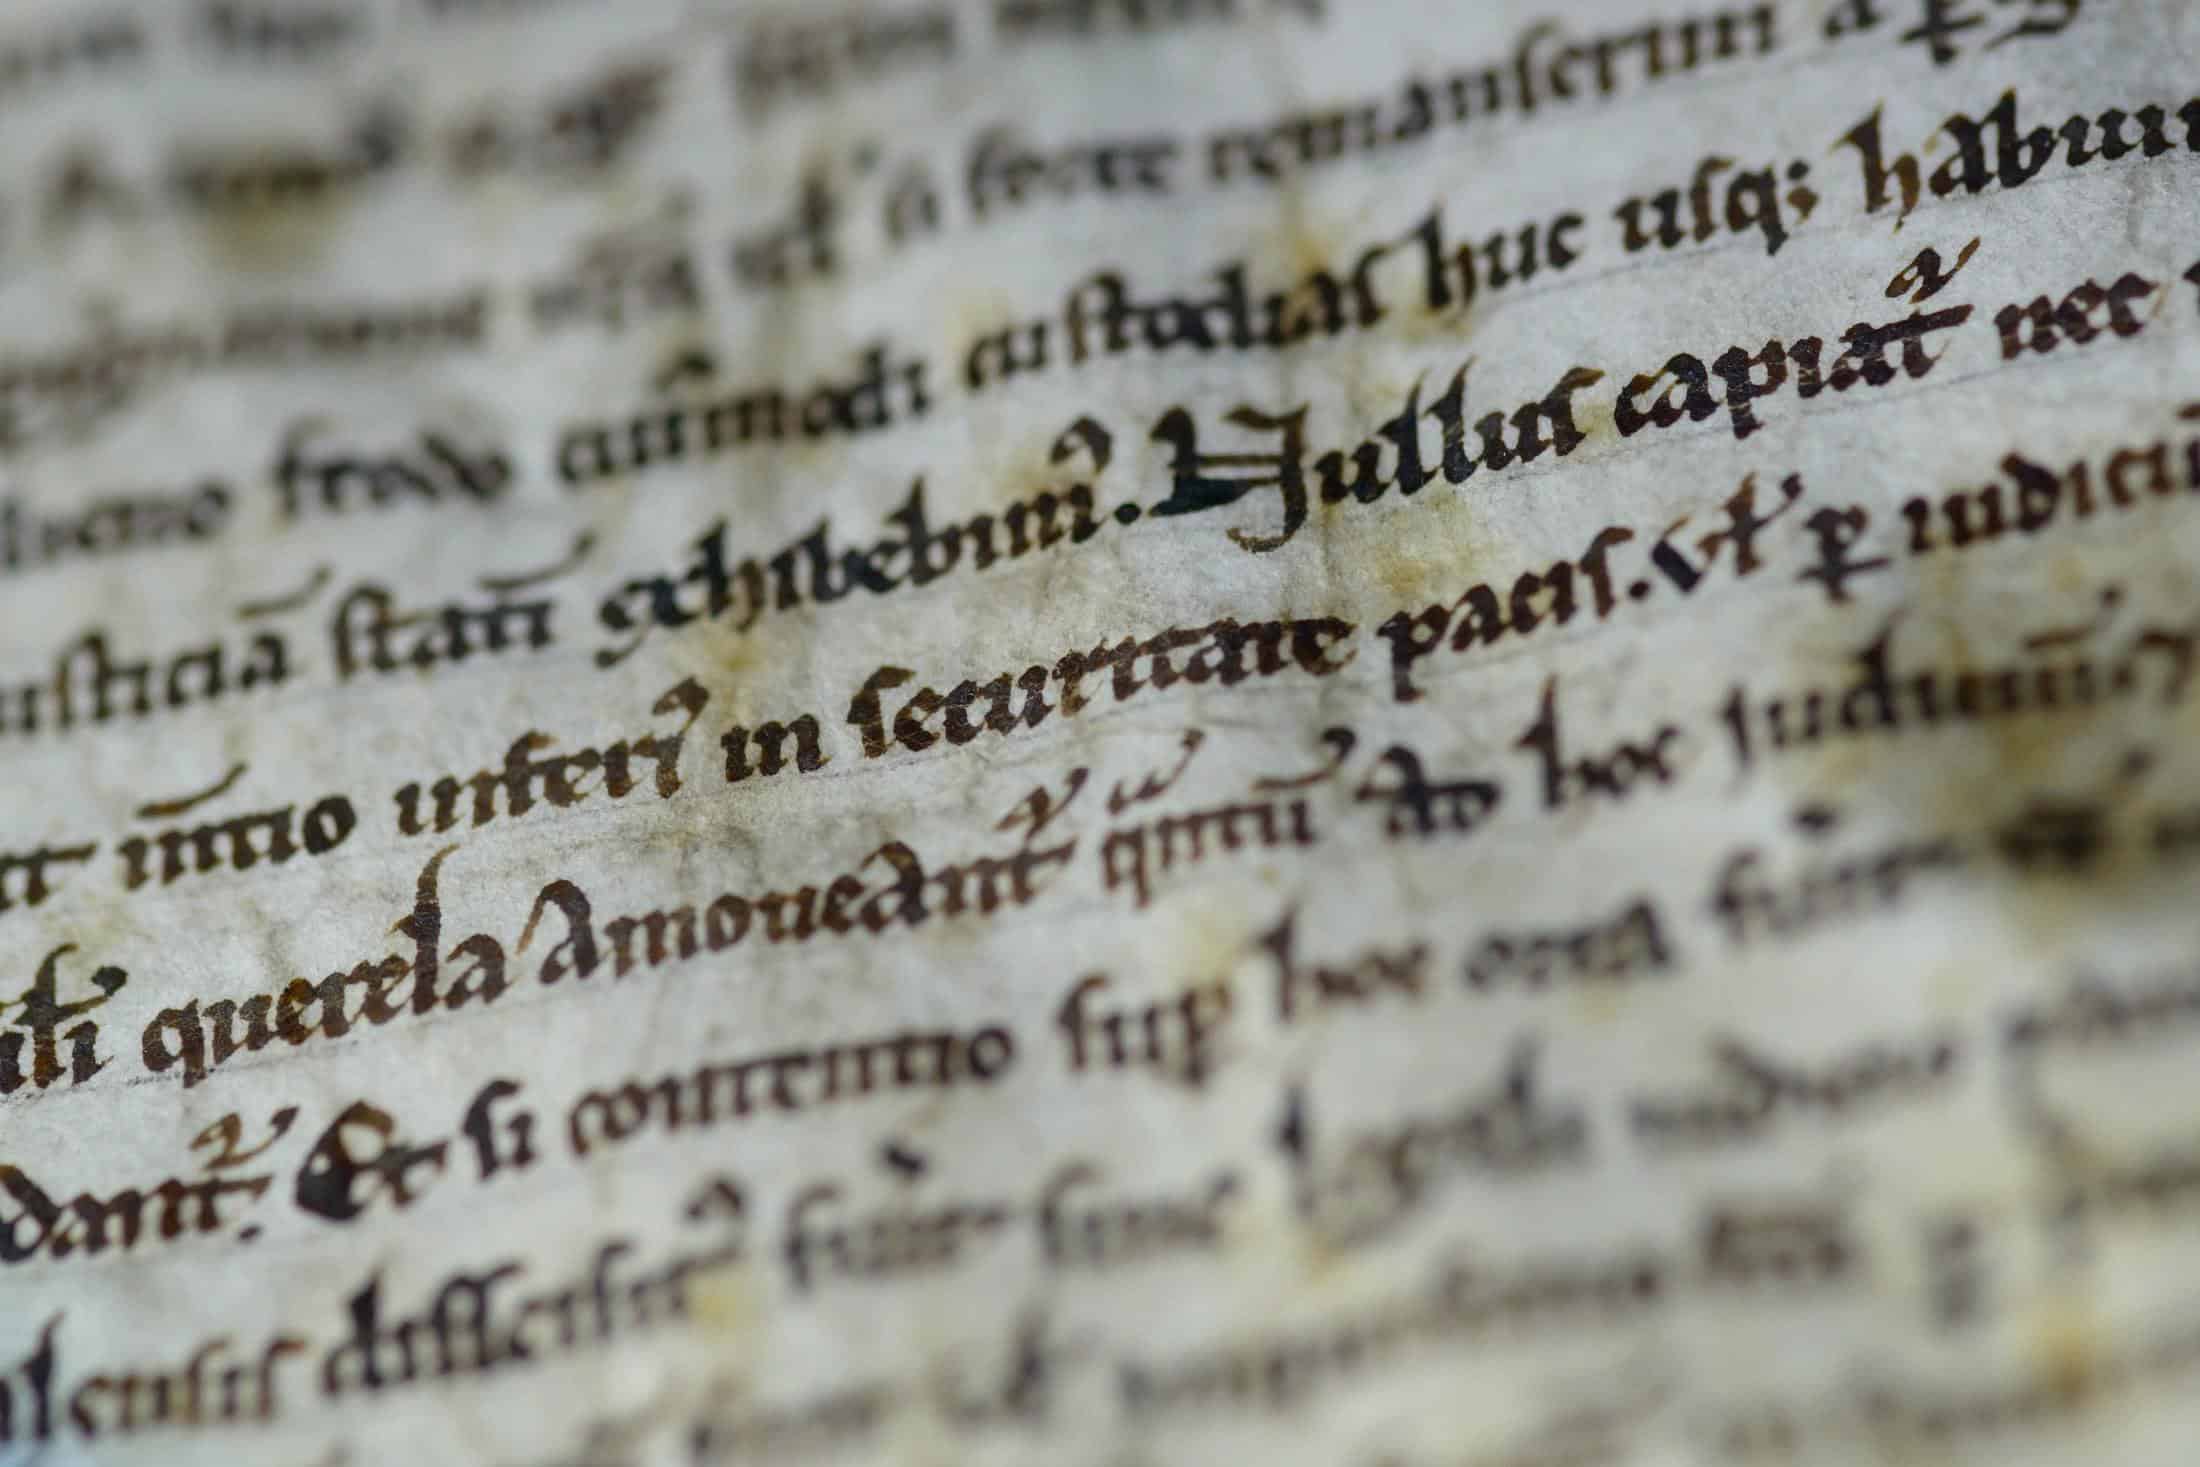 Video – Reactions as Magna Carta used to try and get around Covid restrictions